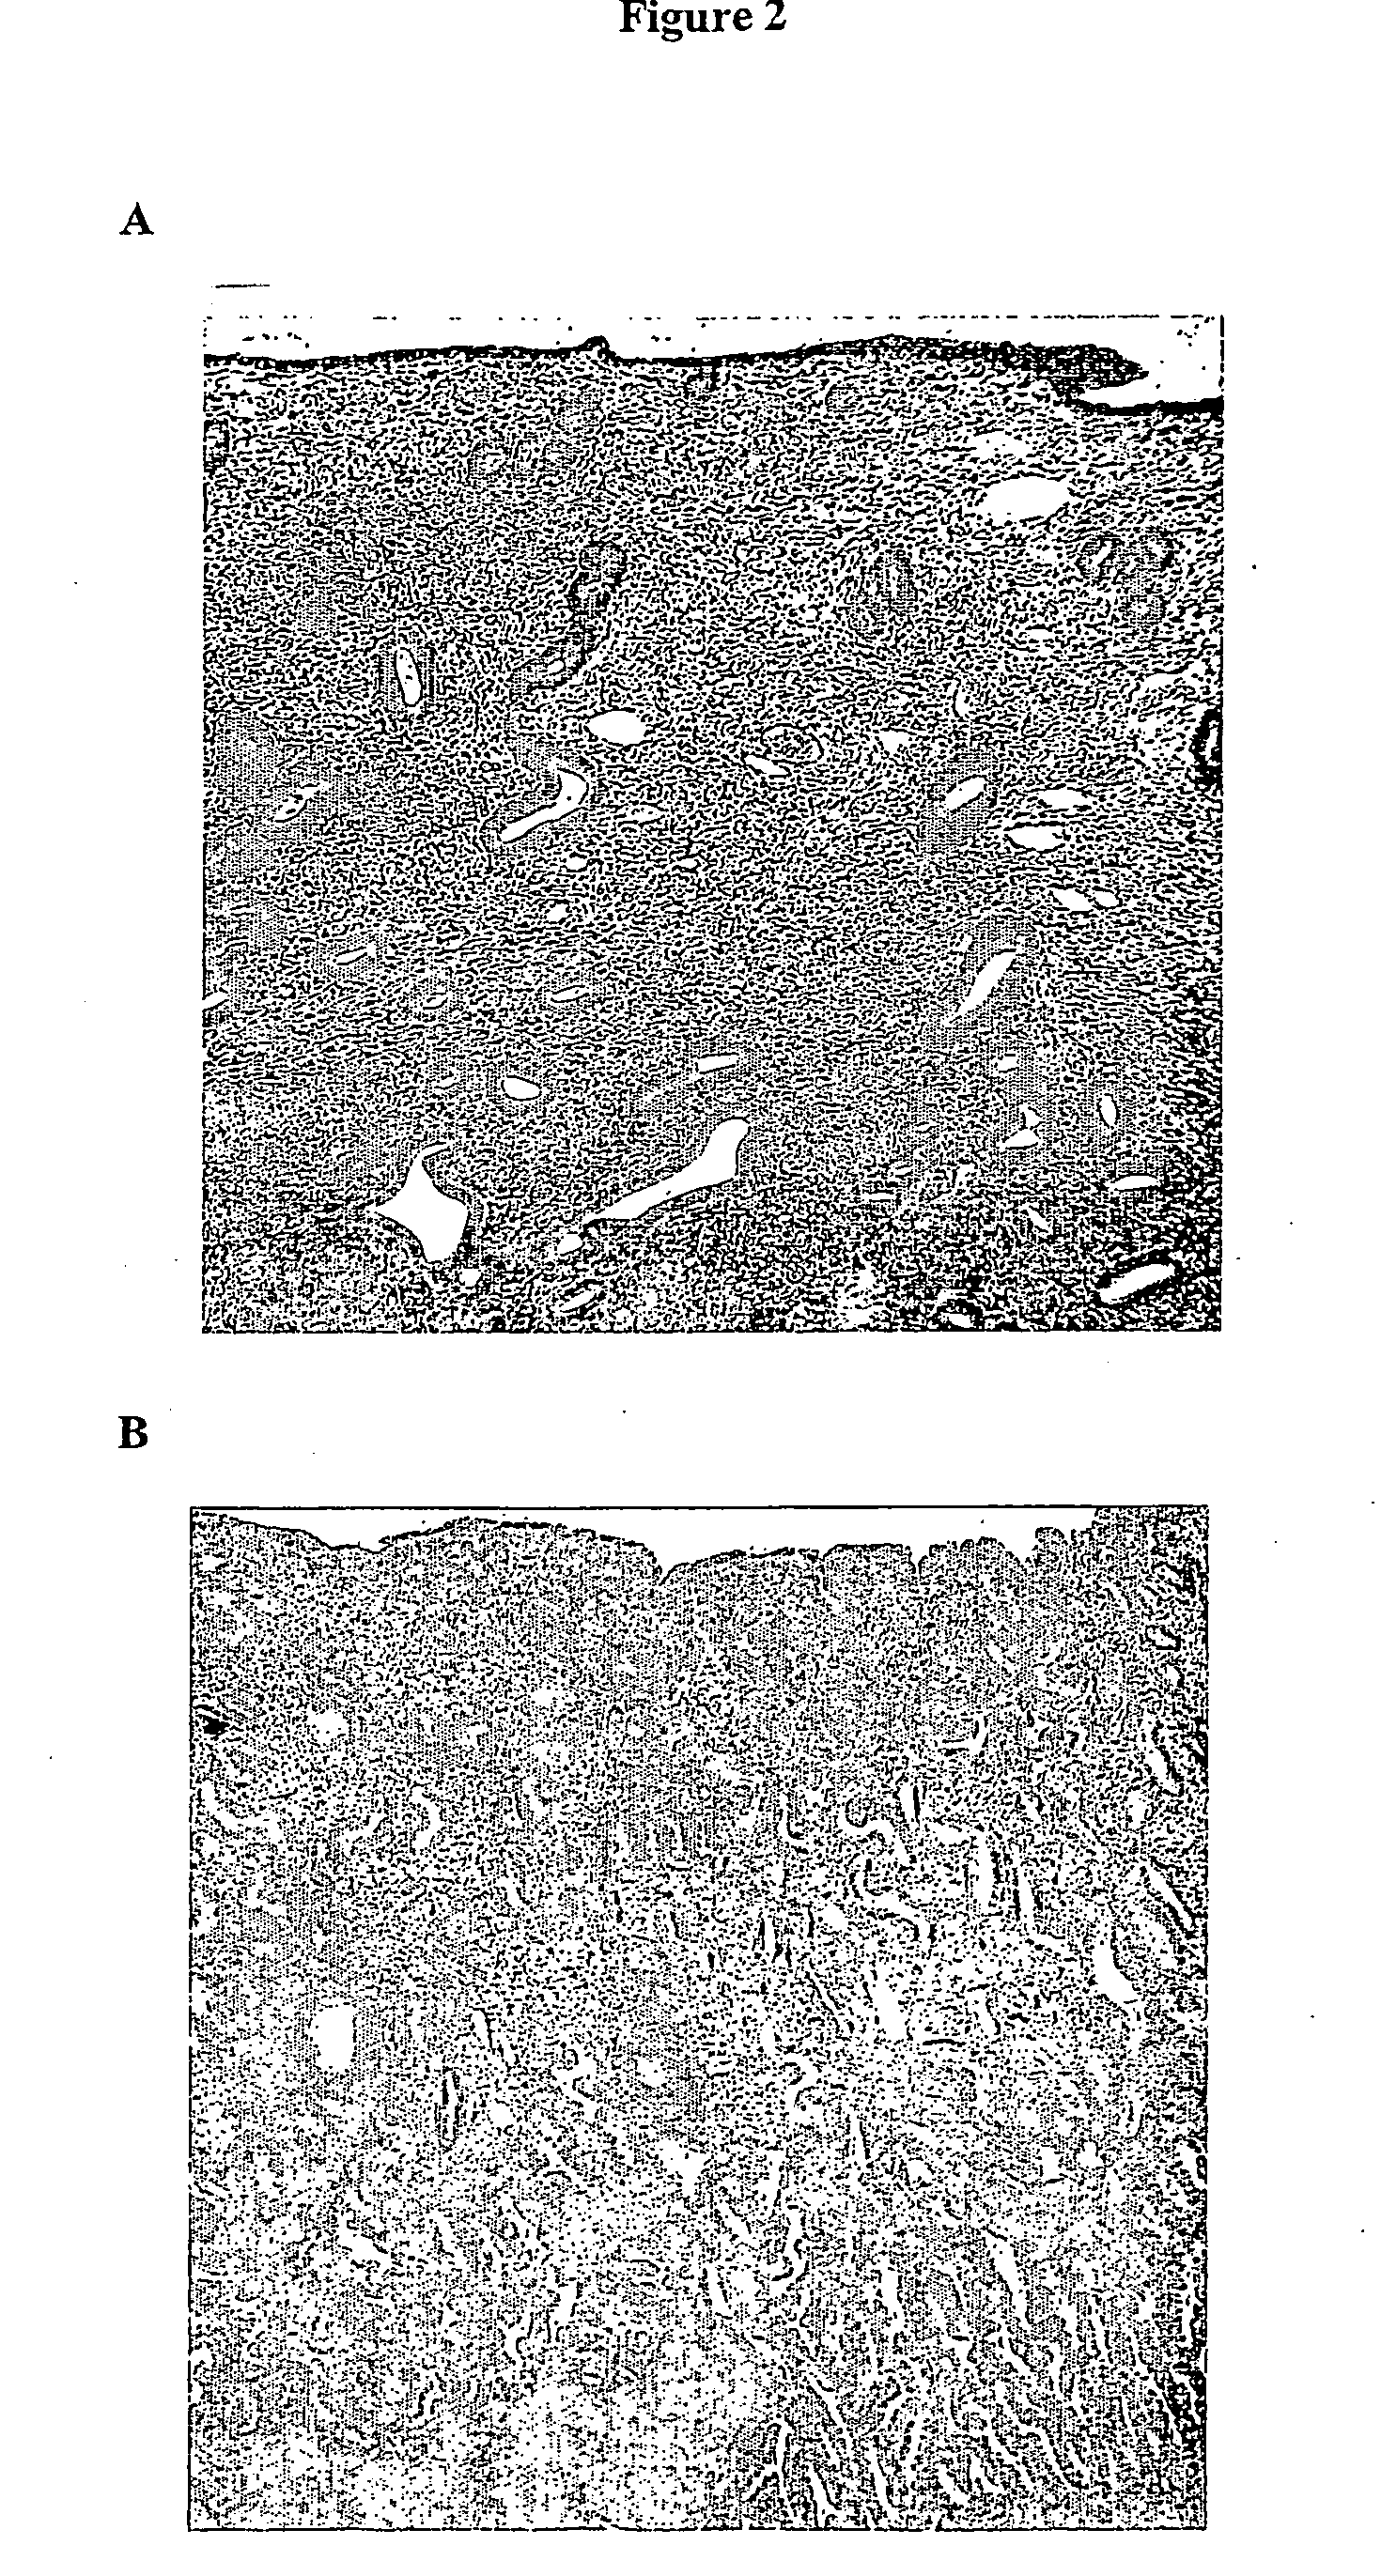 Methods For Detecting Markers Associated With Endometrial Disease or Phase